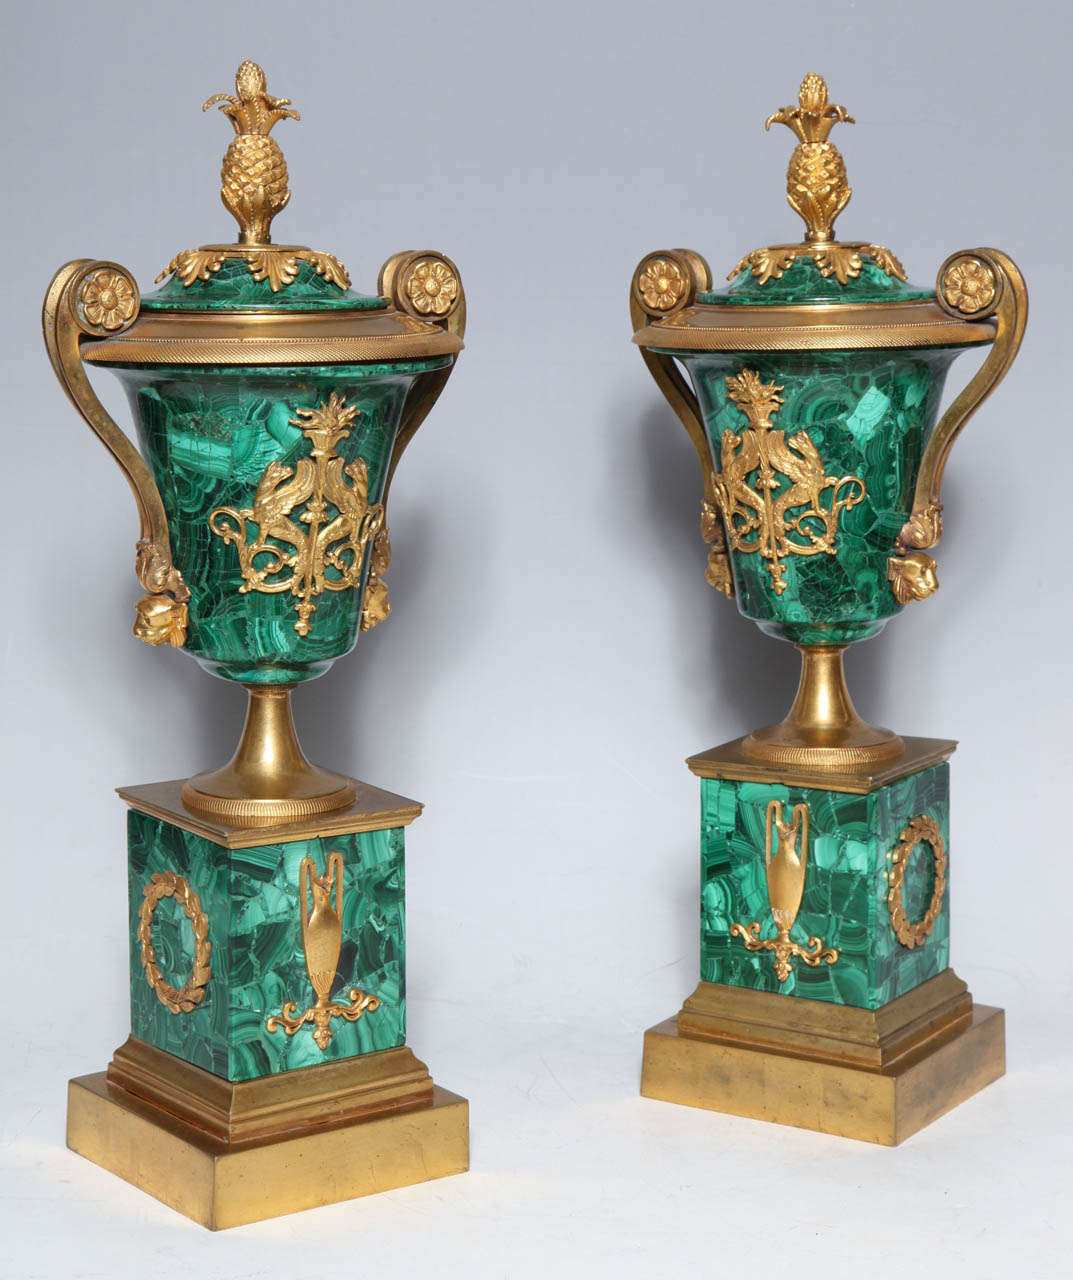 A very fine pair of Antique Russian Empire period, Ormolu mounted and Malechite covered vases. Each vase having a pair of handles starting with rosettes and tapering down, resting on a pair of lions heads, covers adorned with a pair of fine Empire